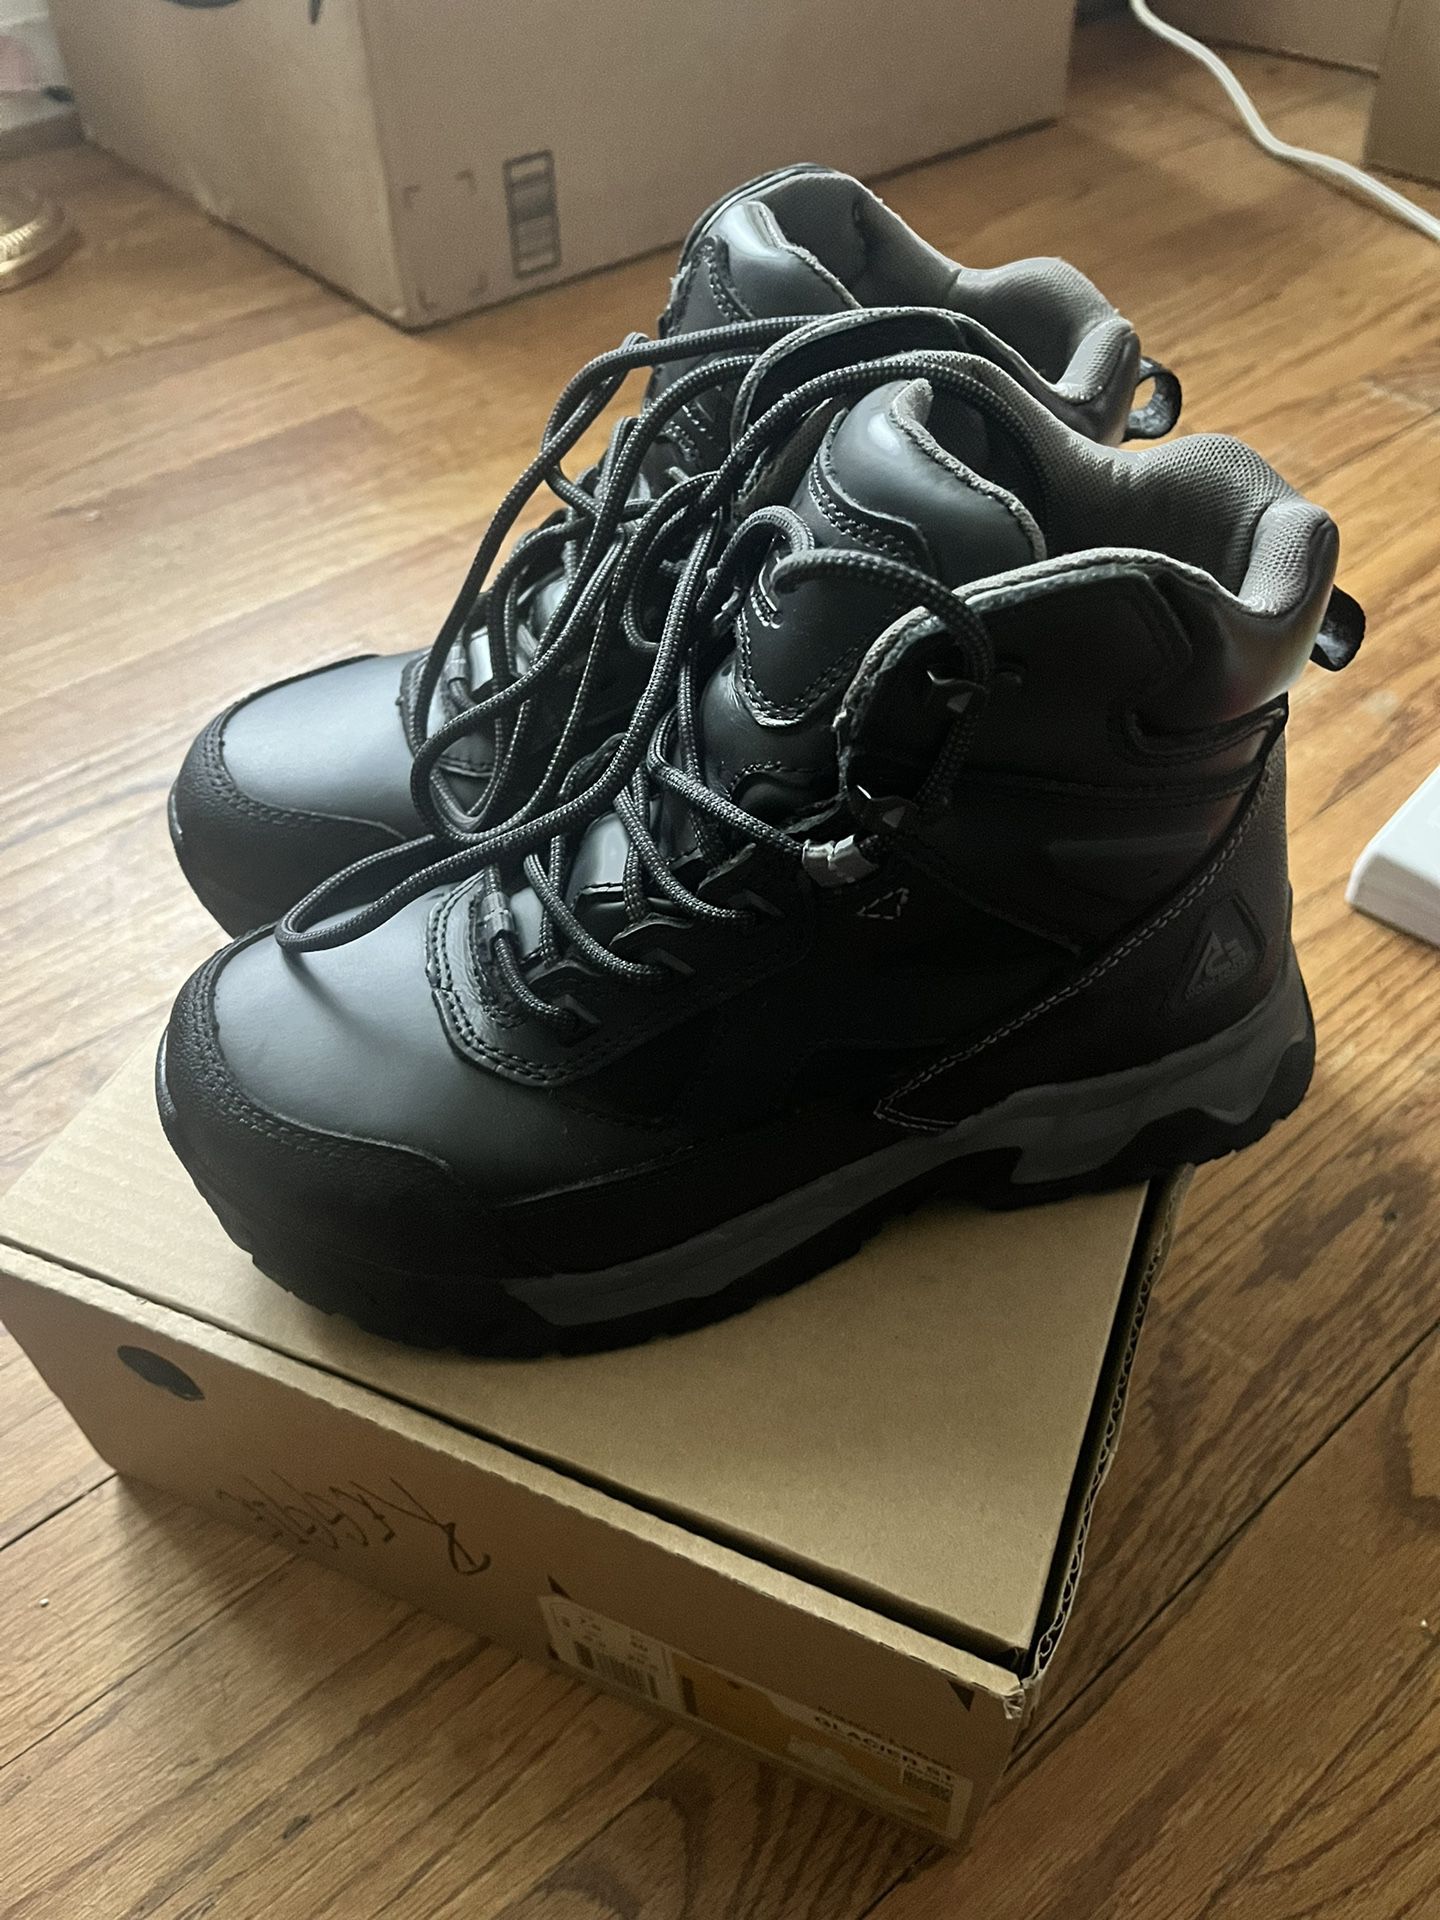 Steel Toe Boots Size 7 1/2